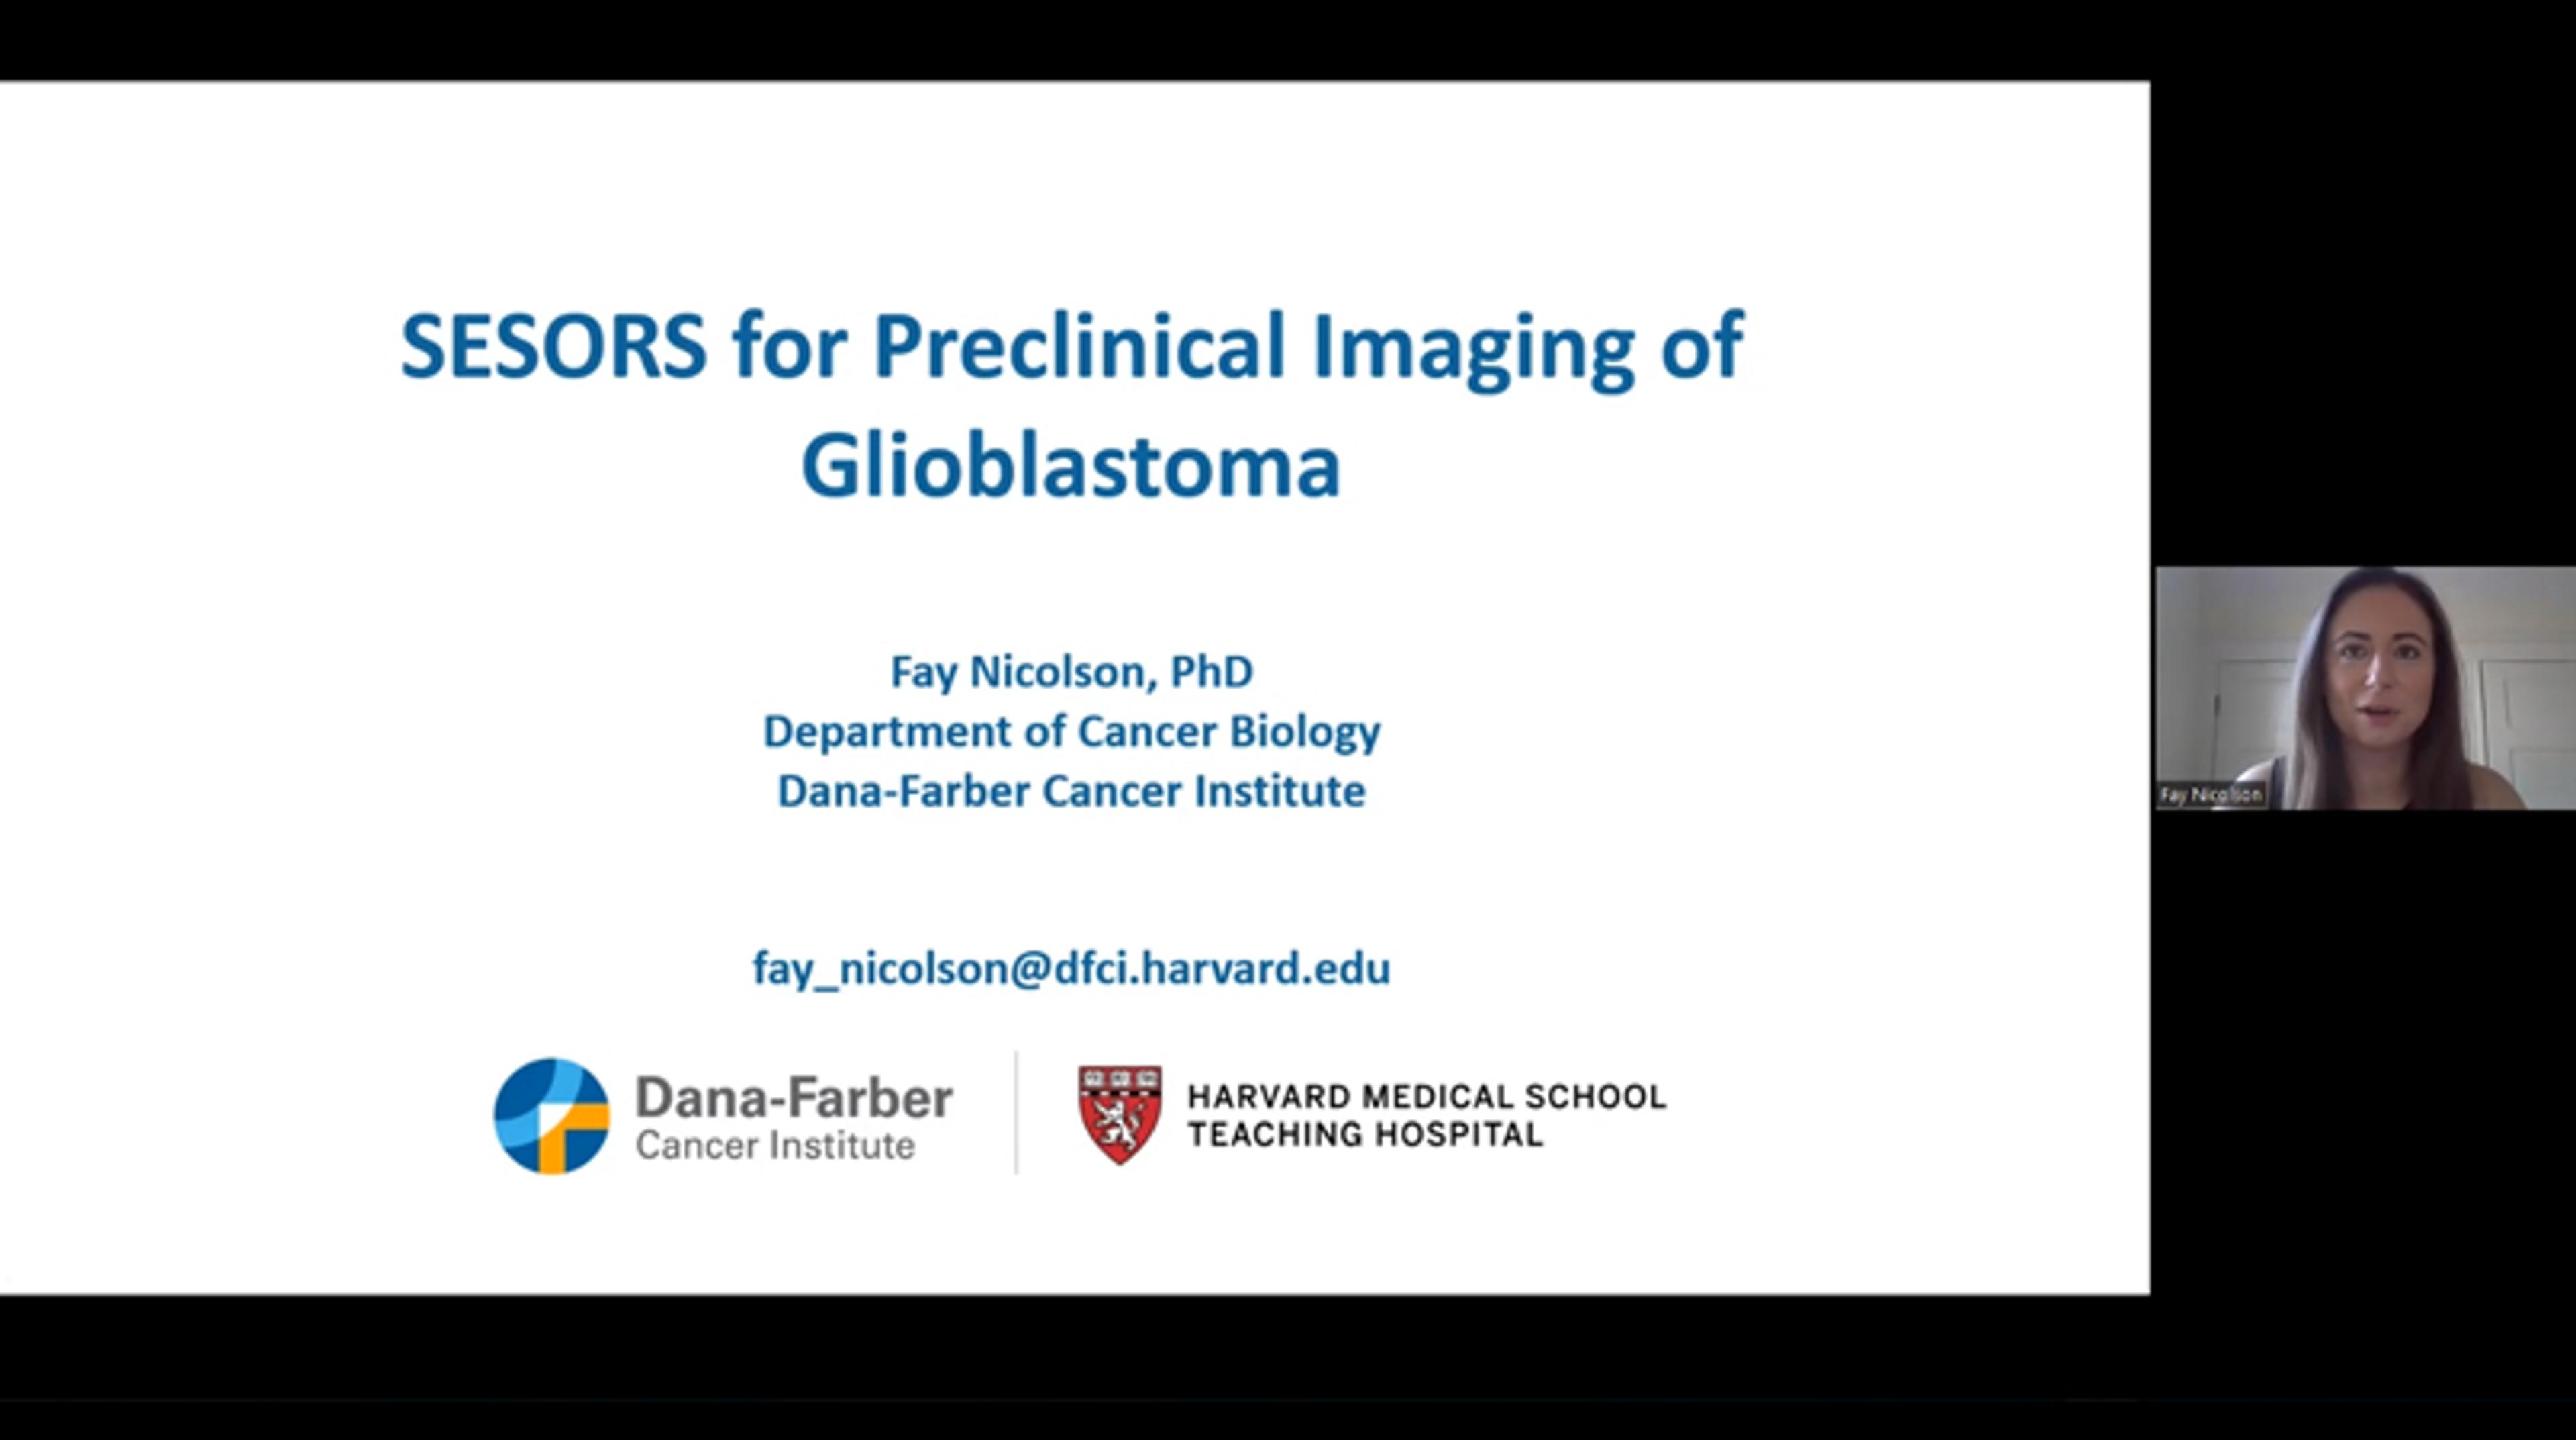 SESORS for preclinical imaging of glioblastoma